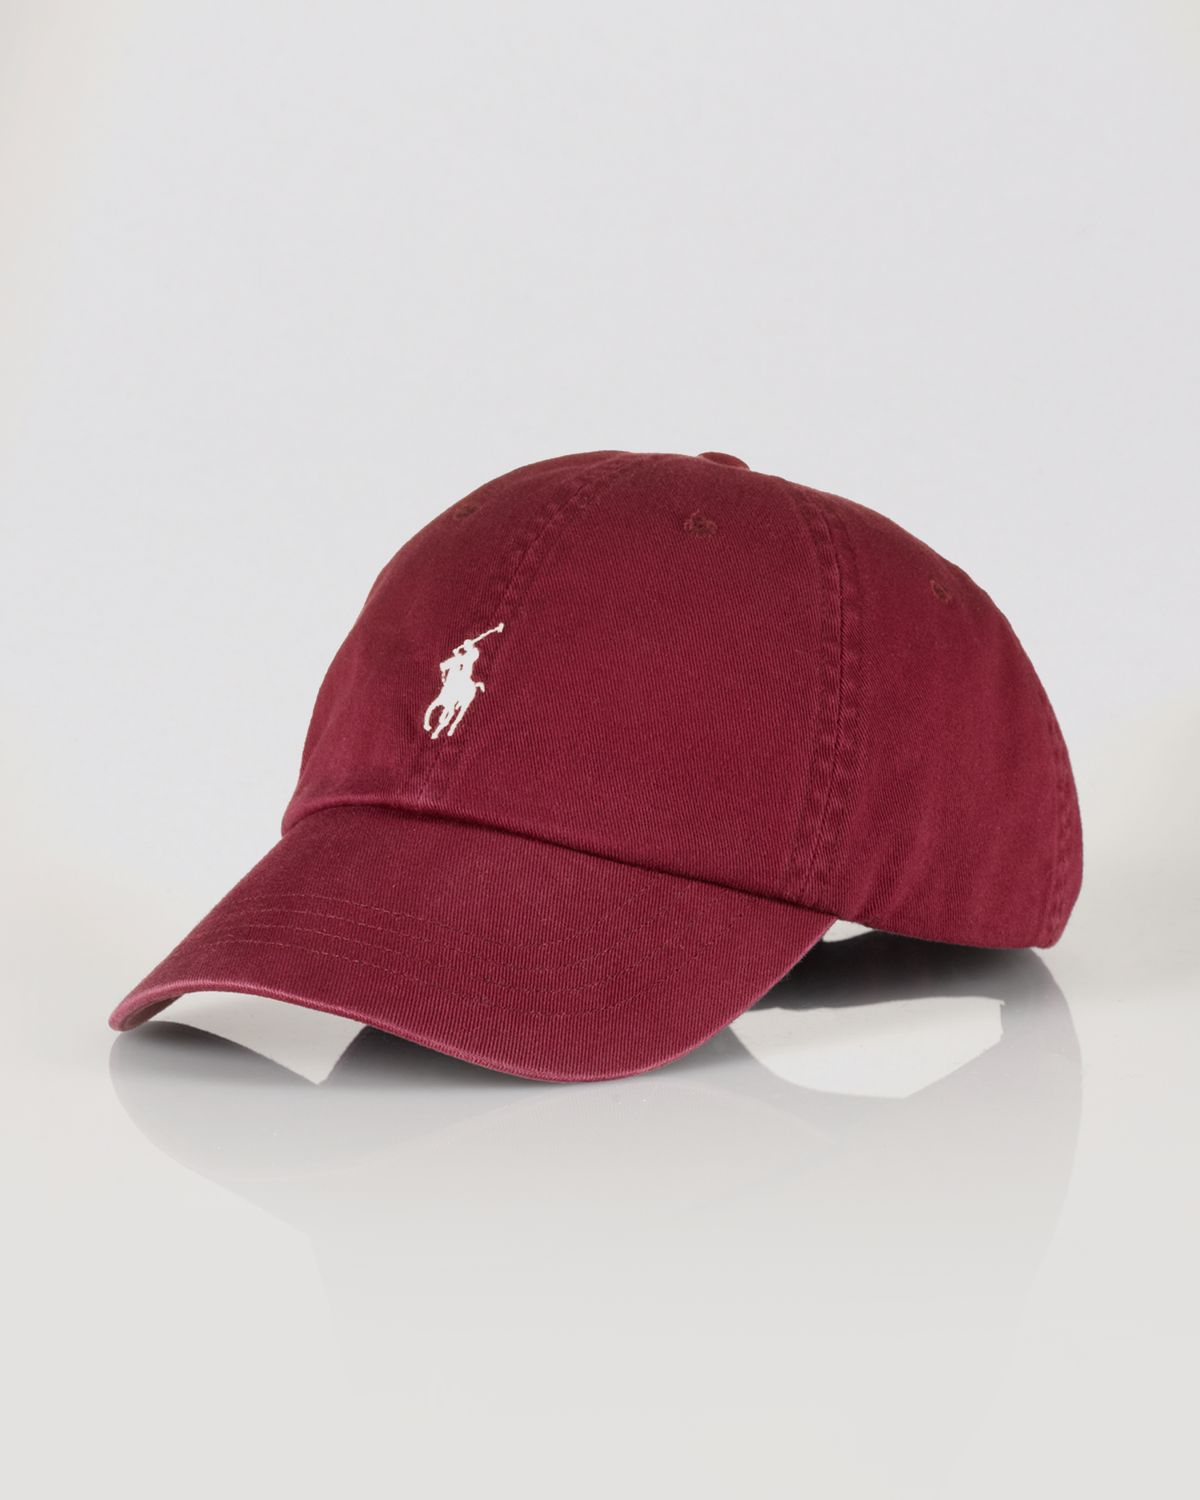 polo hats for cheap